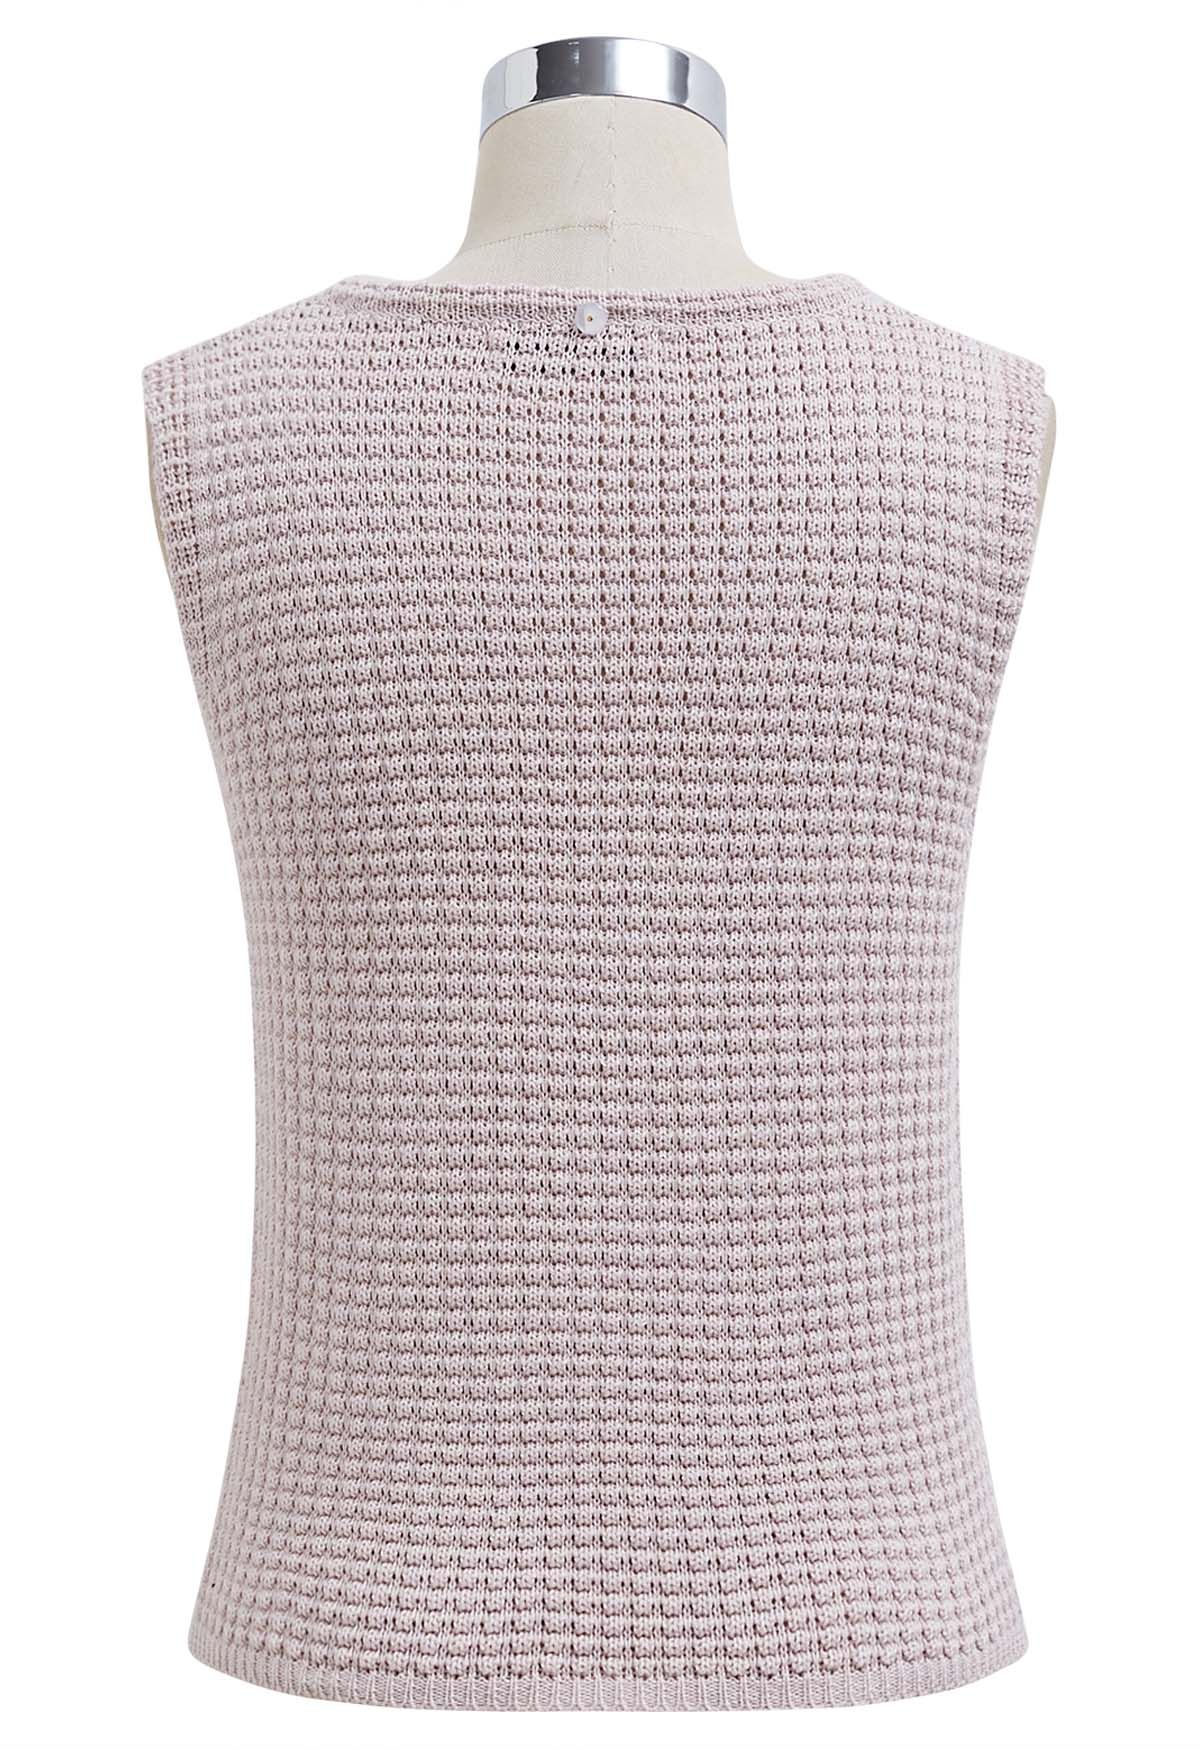 Solid Color Openwork Knit Sleeveless Top in Light Pink